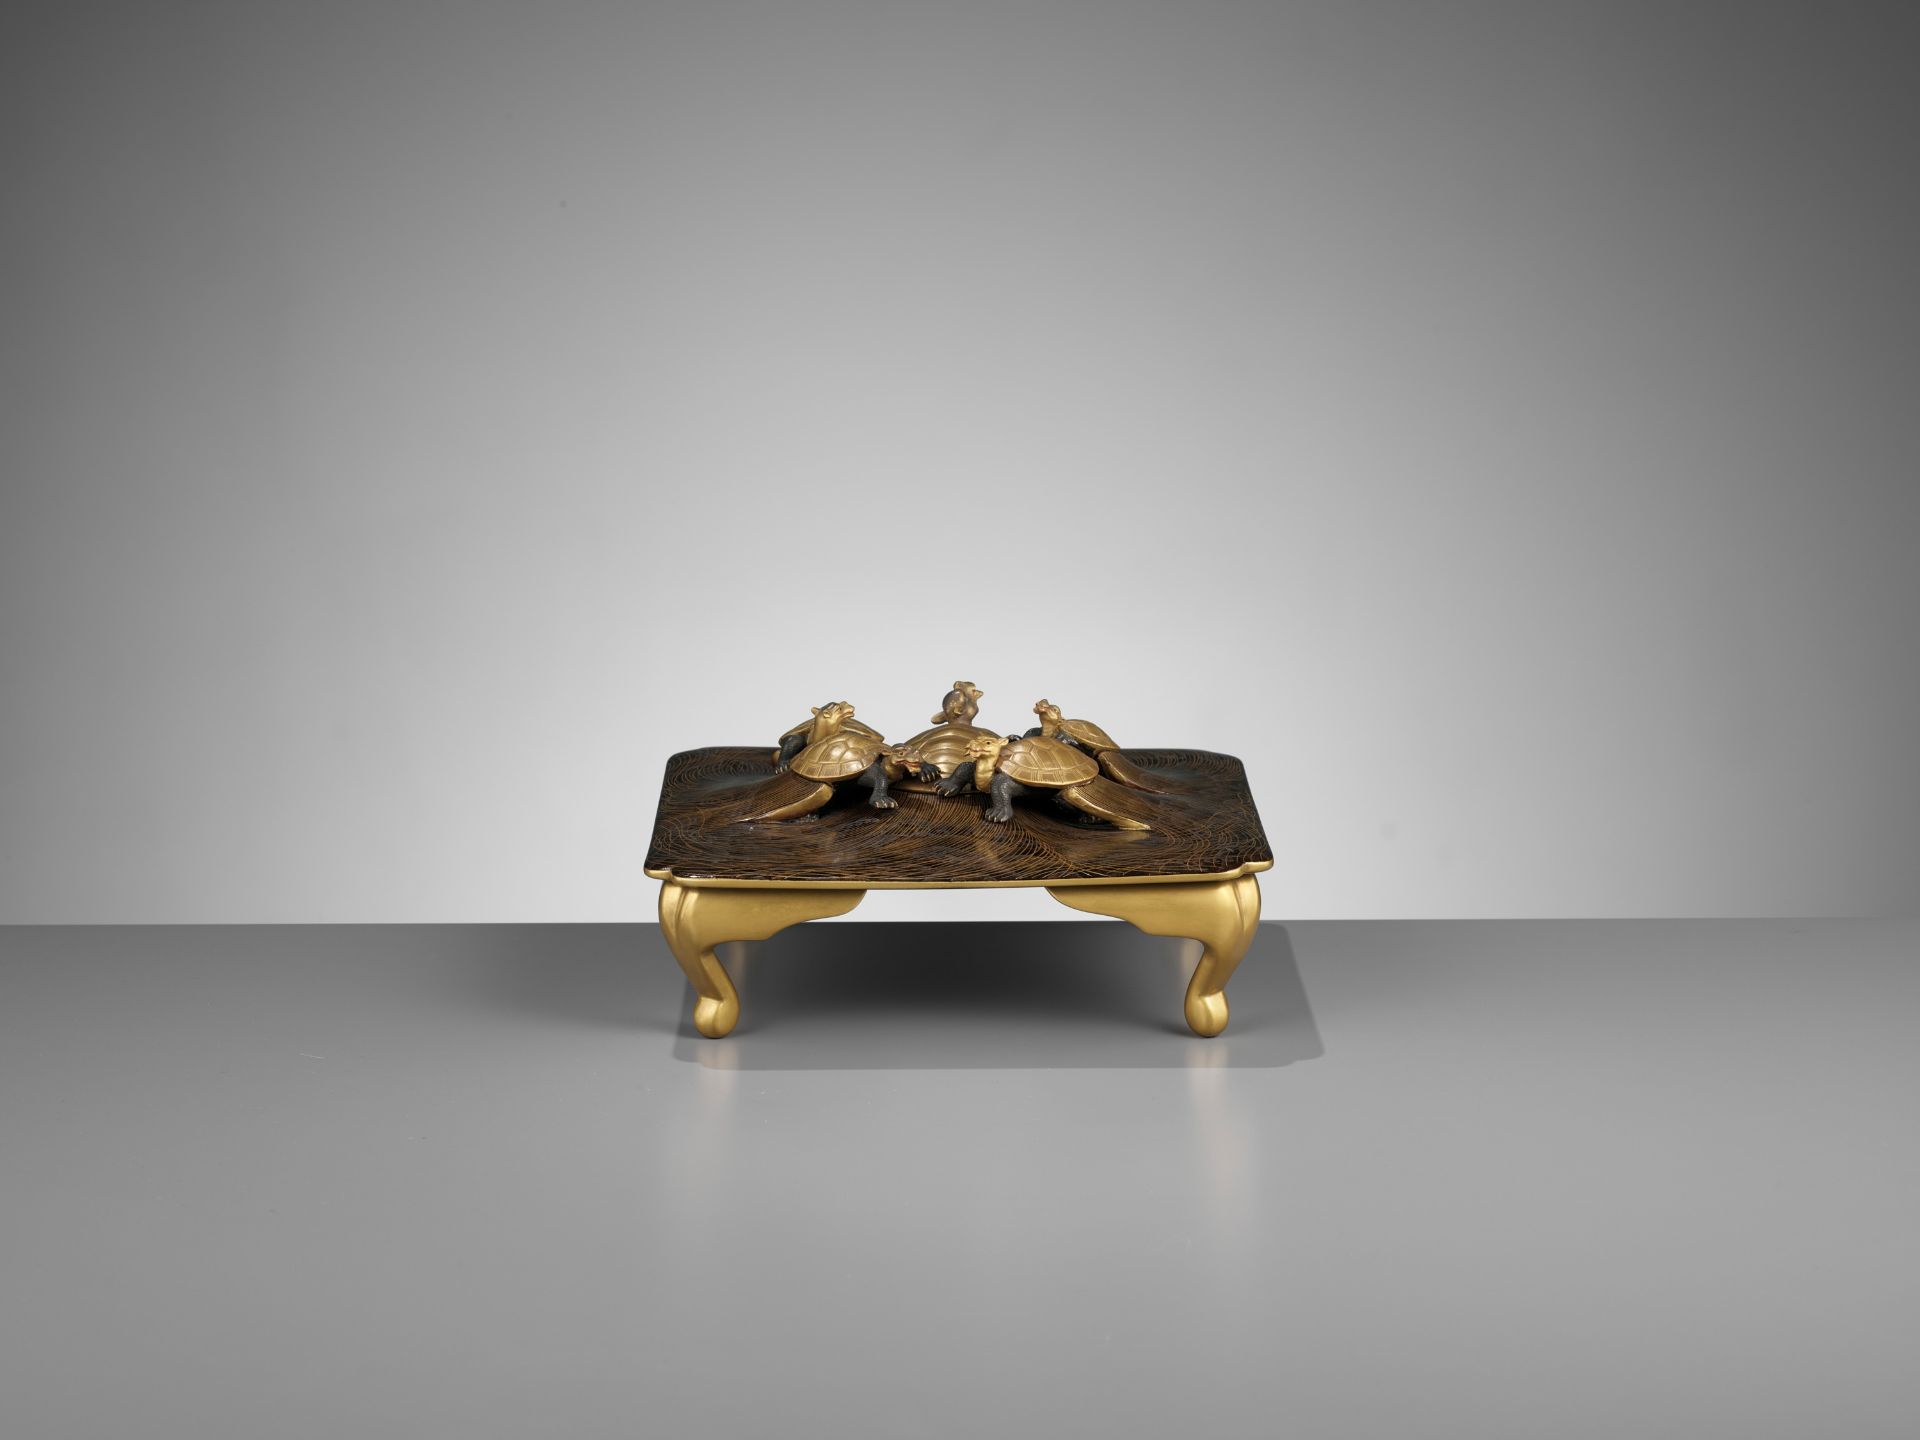 A VERY RARE GOLD LACQUER TABLE-FORM ORNAMENT DEPICTING MINOGAME - Image 12 of 14